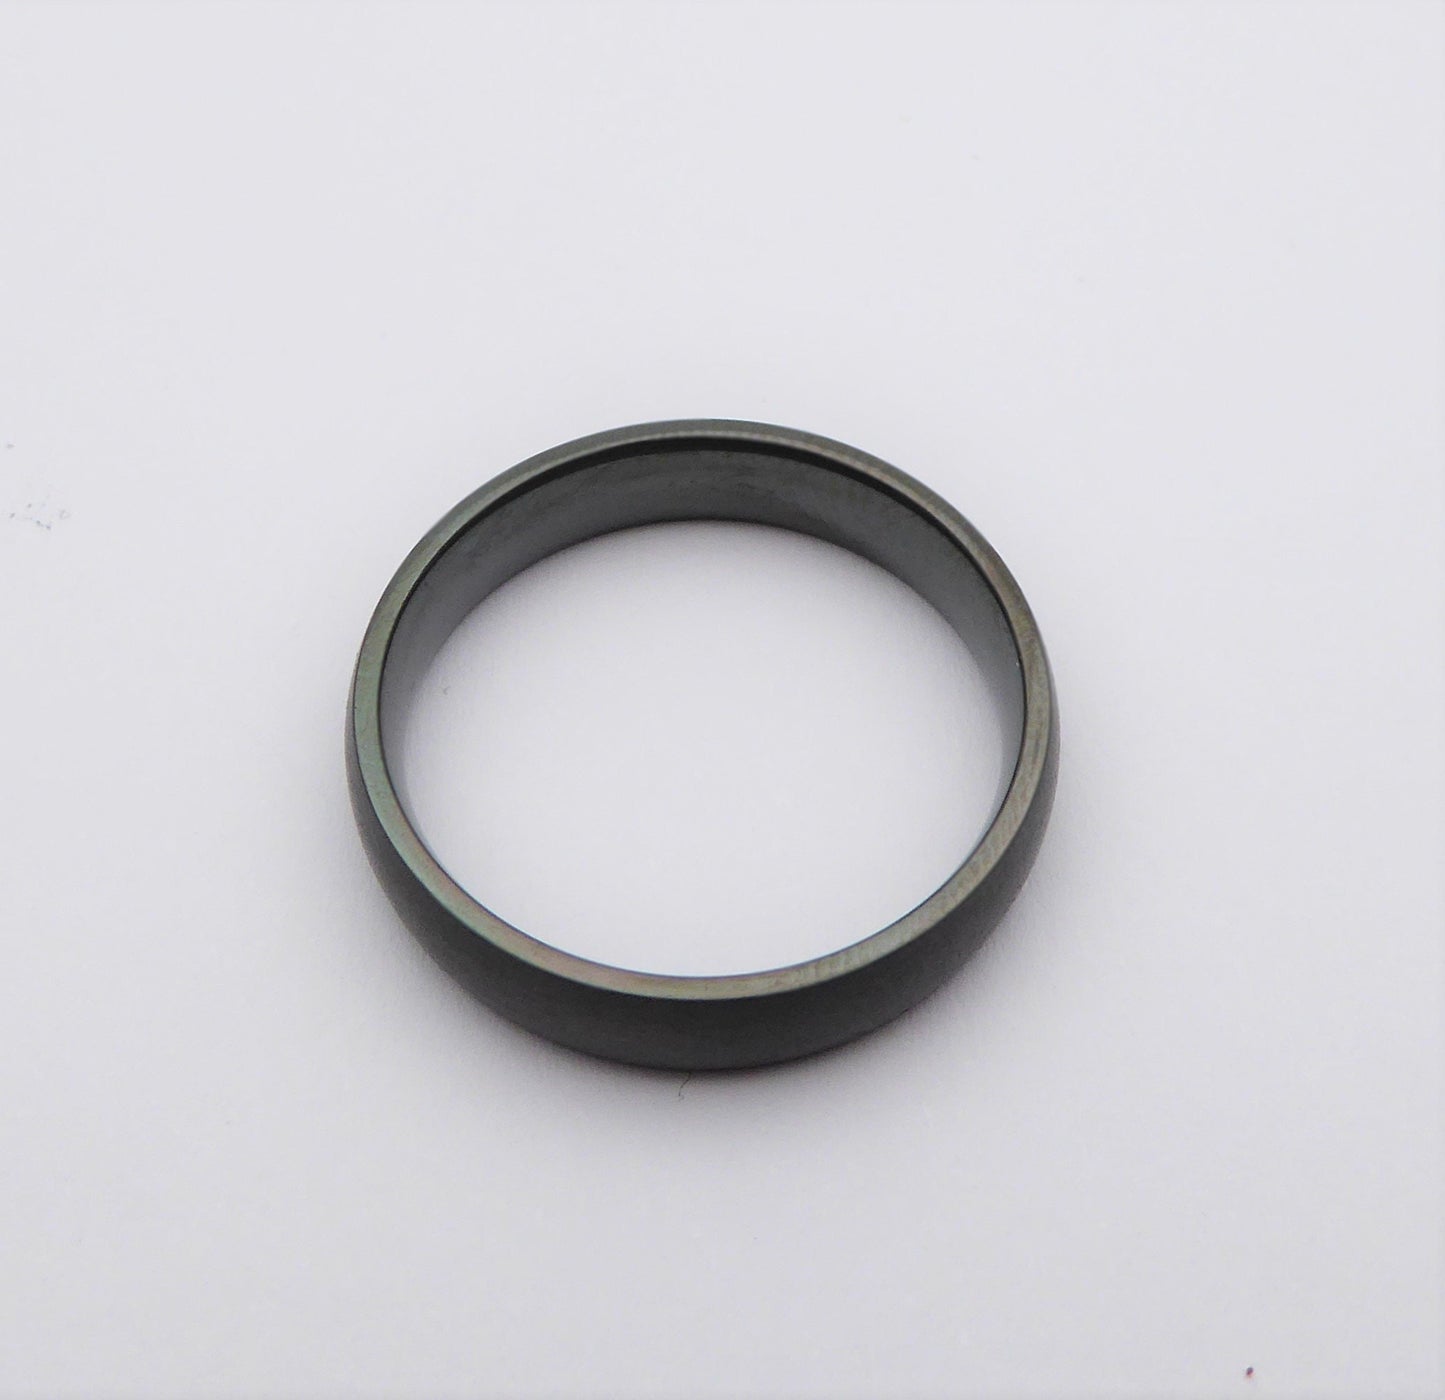 5mm Black Zirconium with matte brushed finish - wedding ring band for men and women